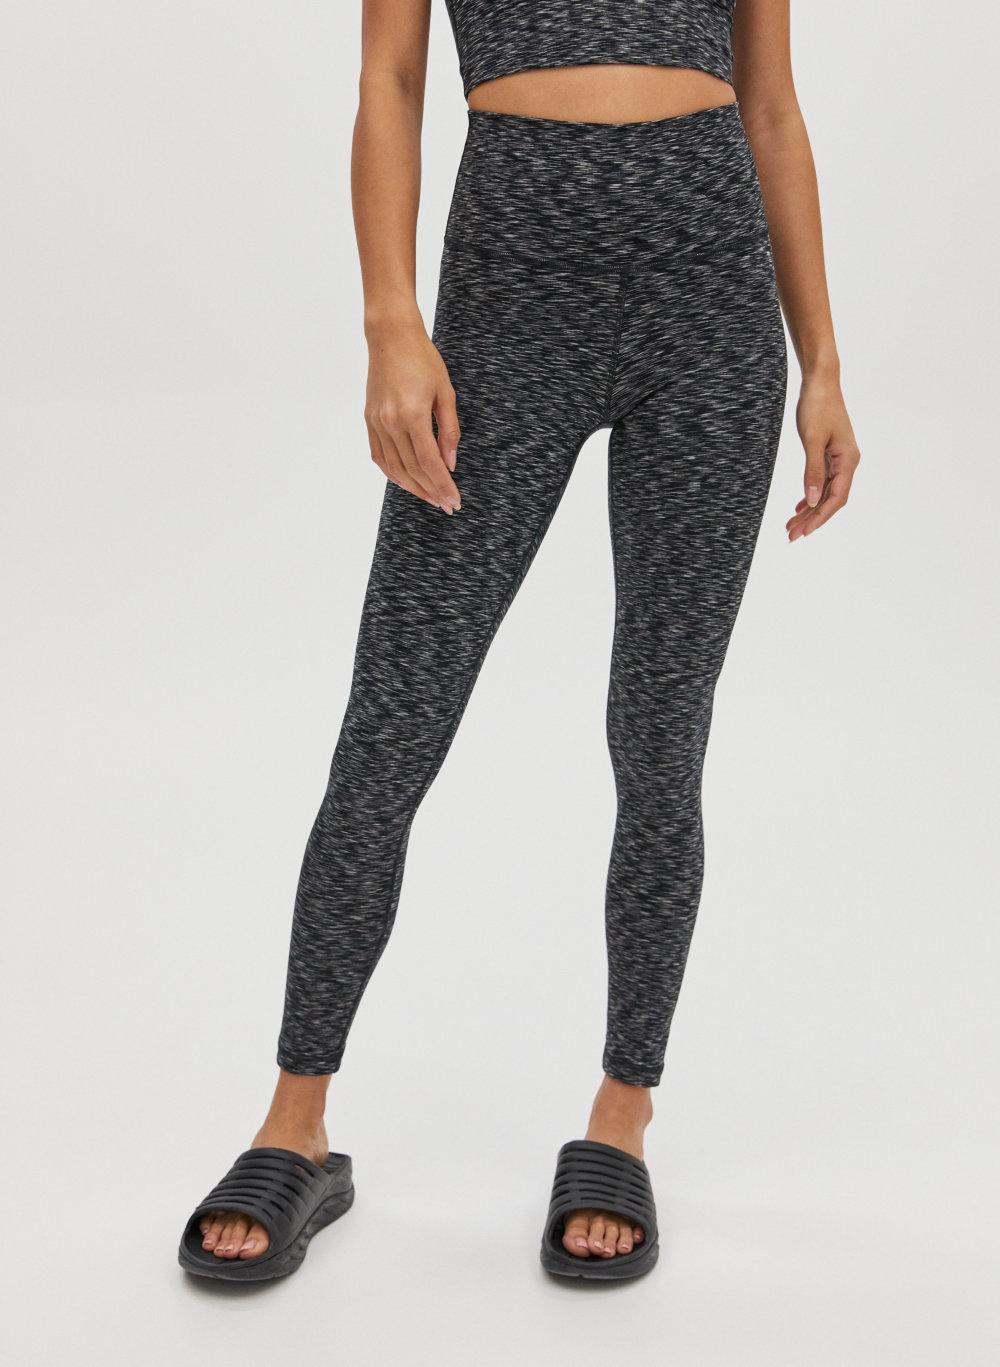 8 Of The Best Leggings @ Every Price Point